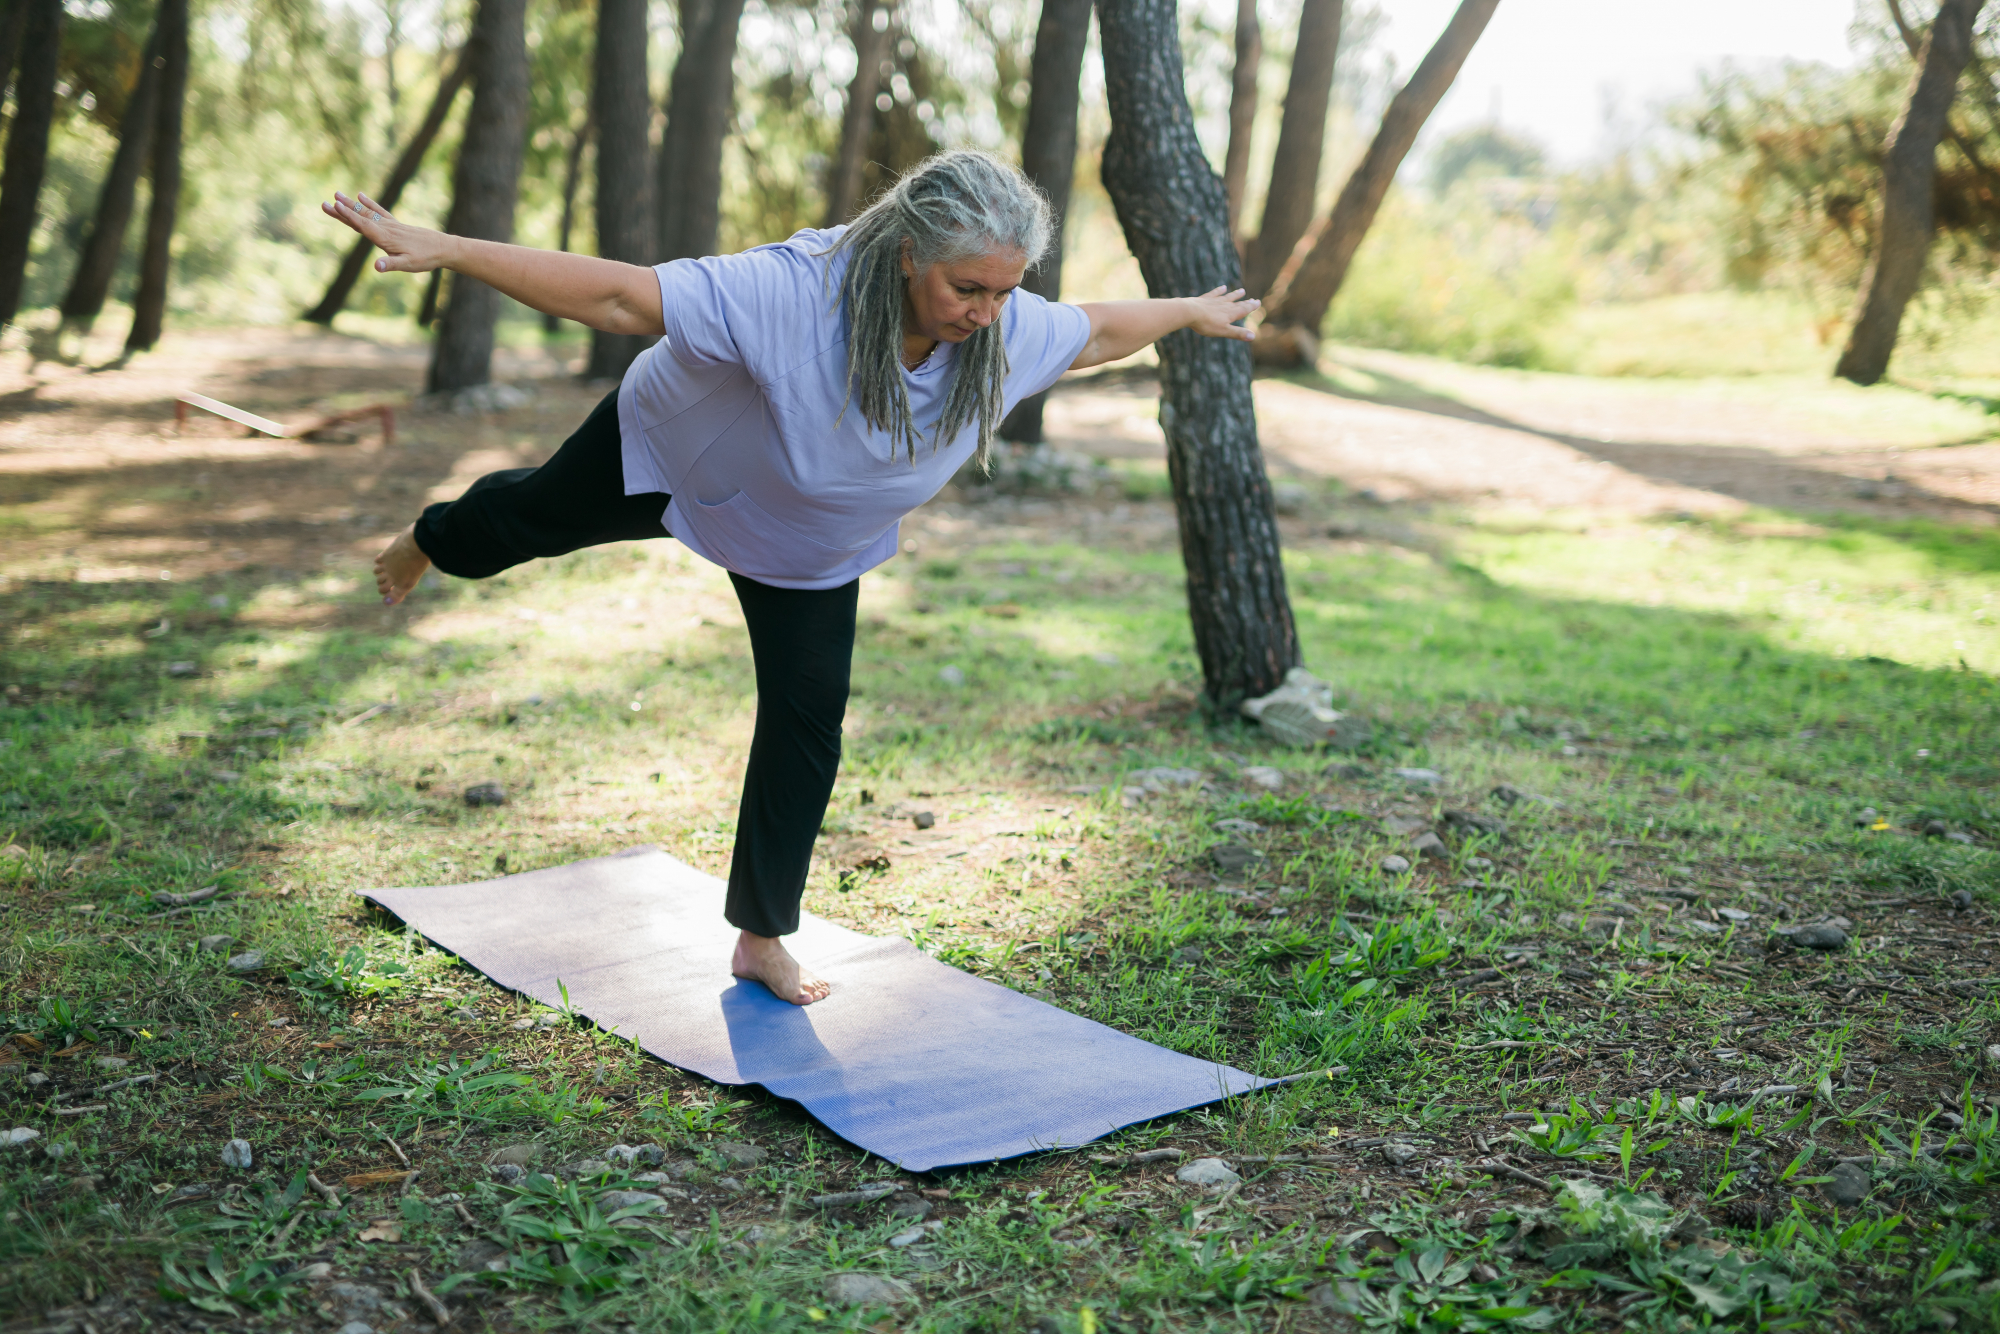 Standing Pilates for Seniors to Improve Balance, Strength and Coordination